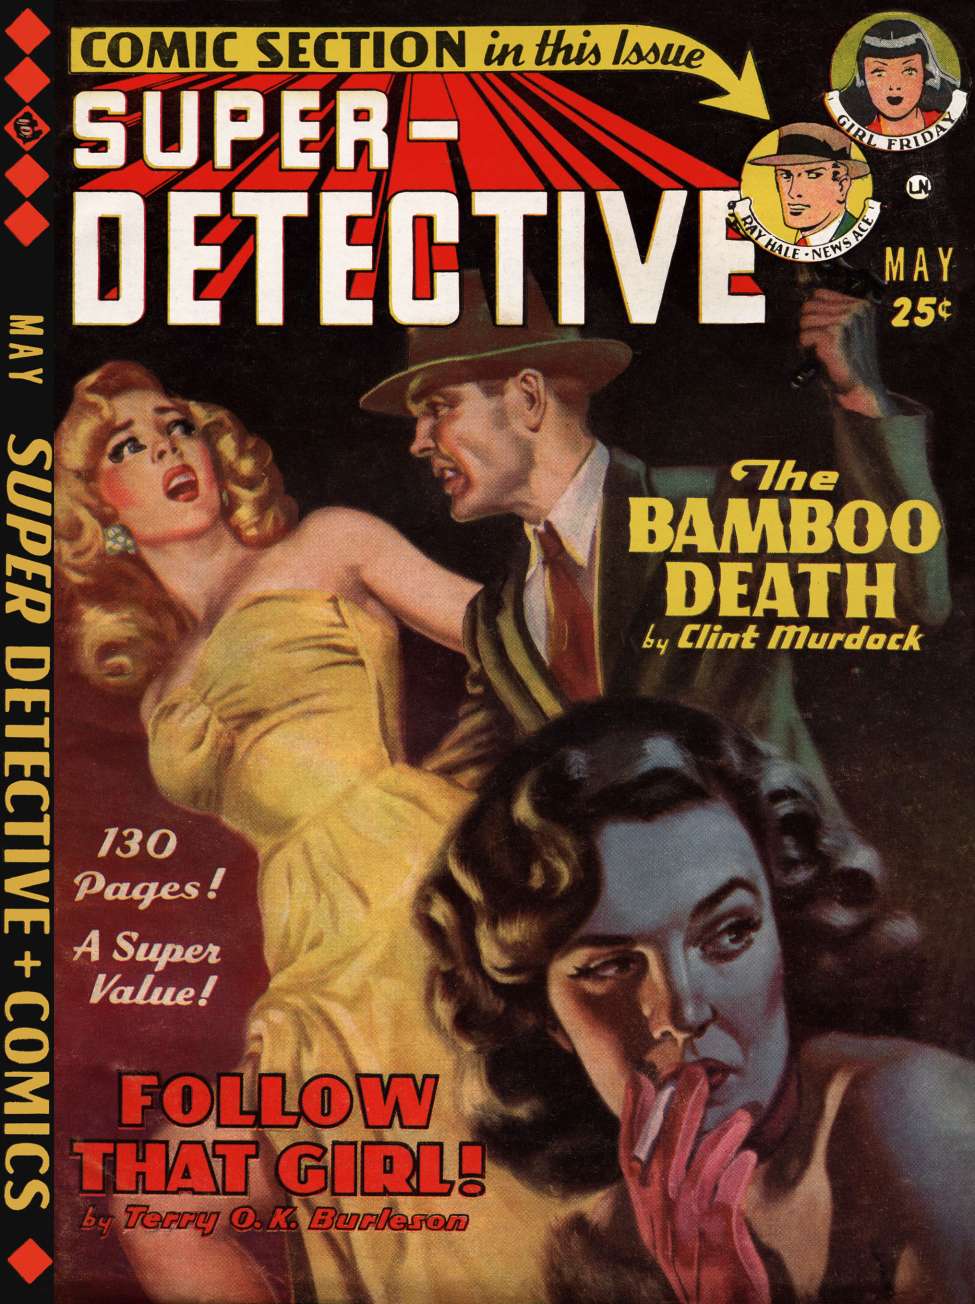 Comic Book Cover For Super-Detective V11 n02 May 1950